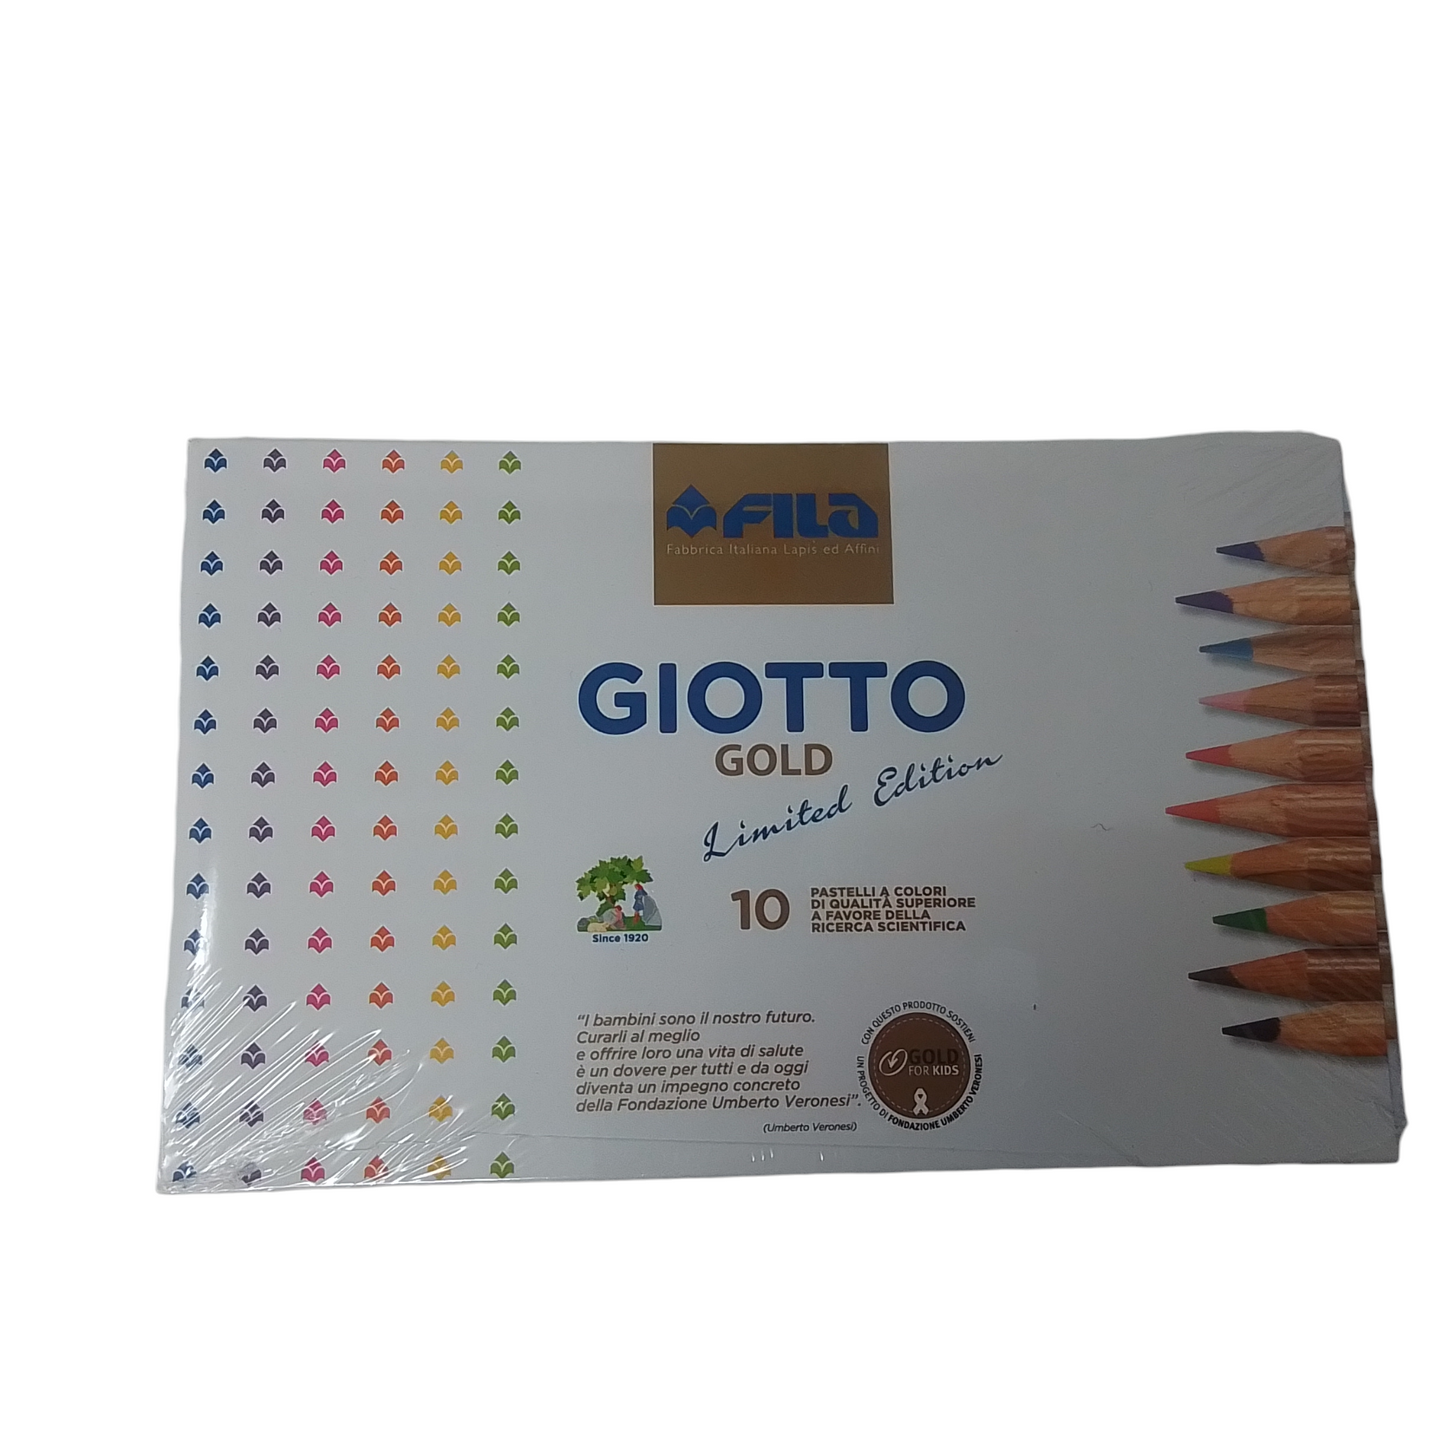 GIOTTO - Gold Limited Edition